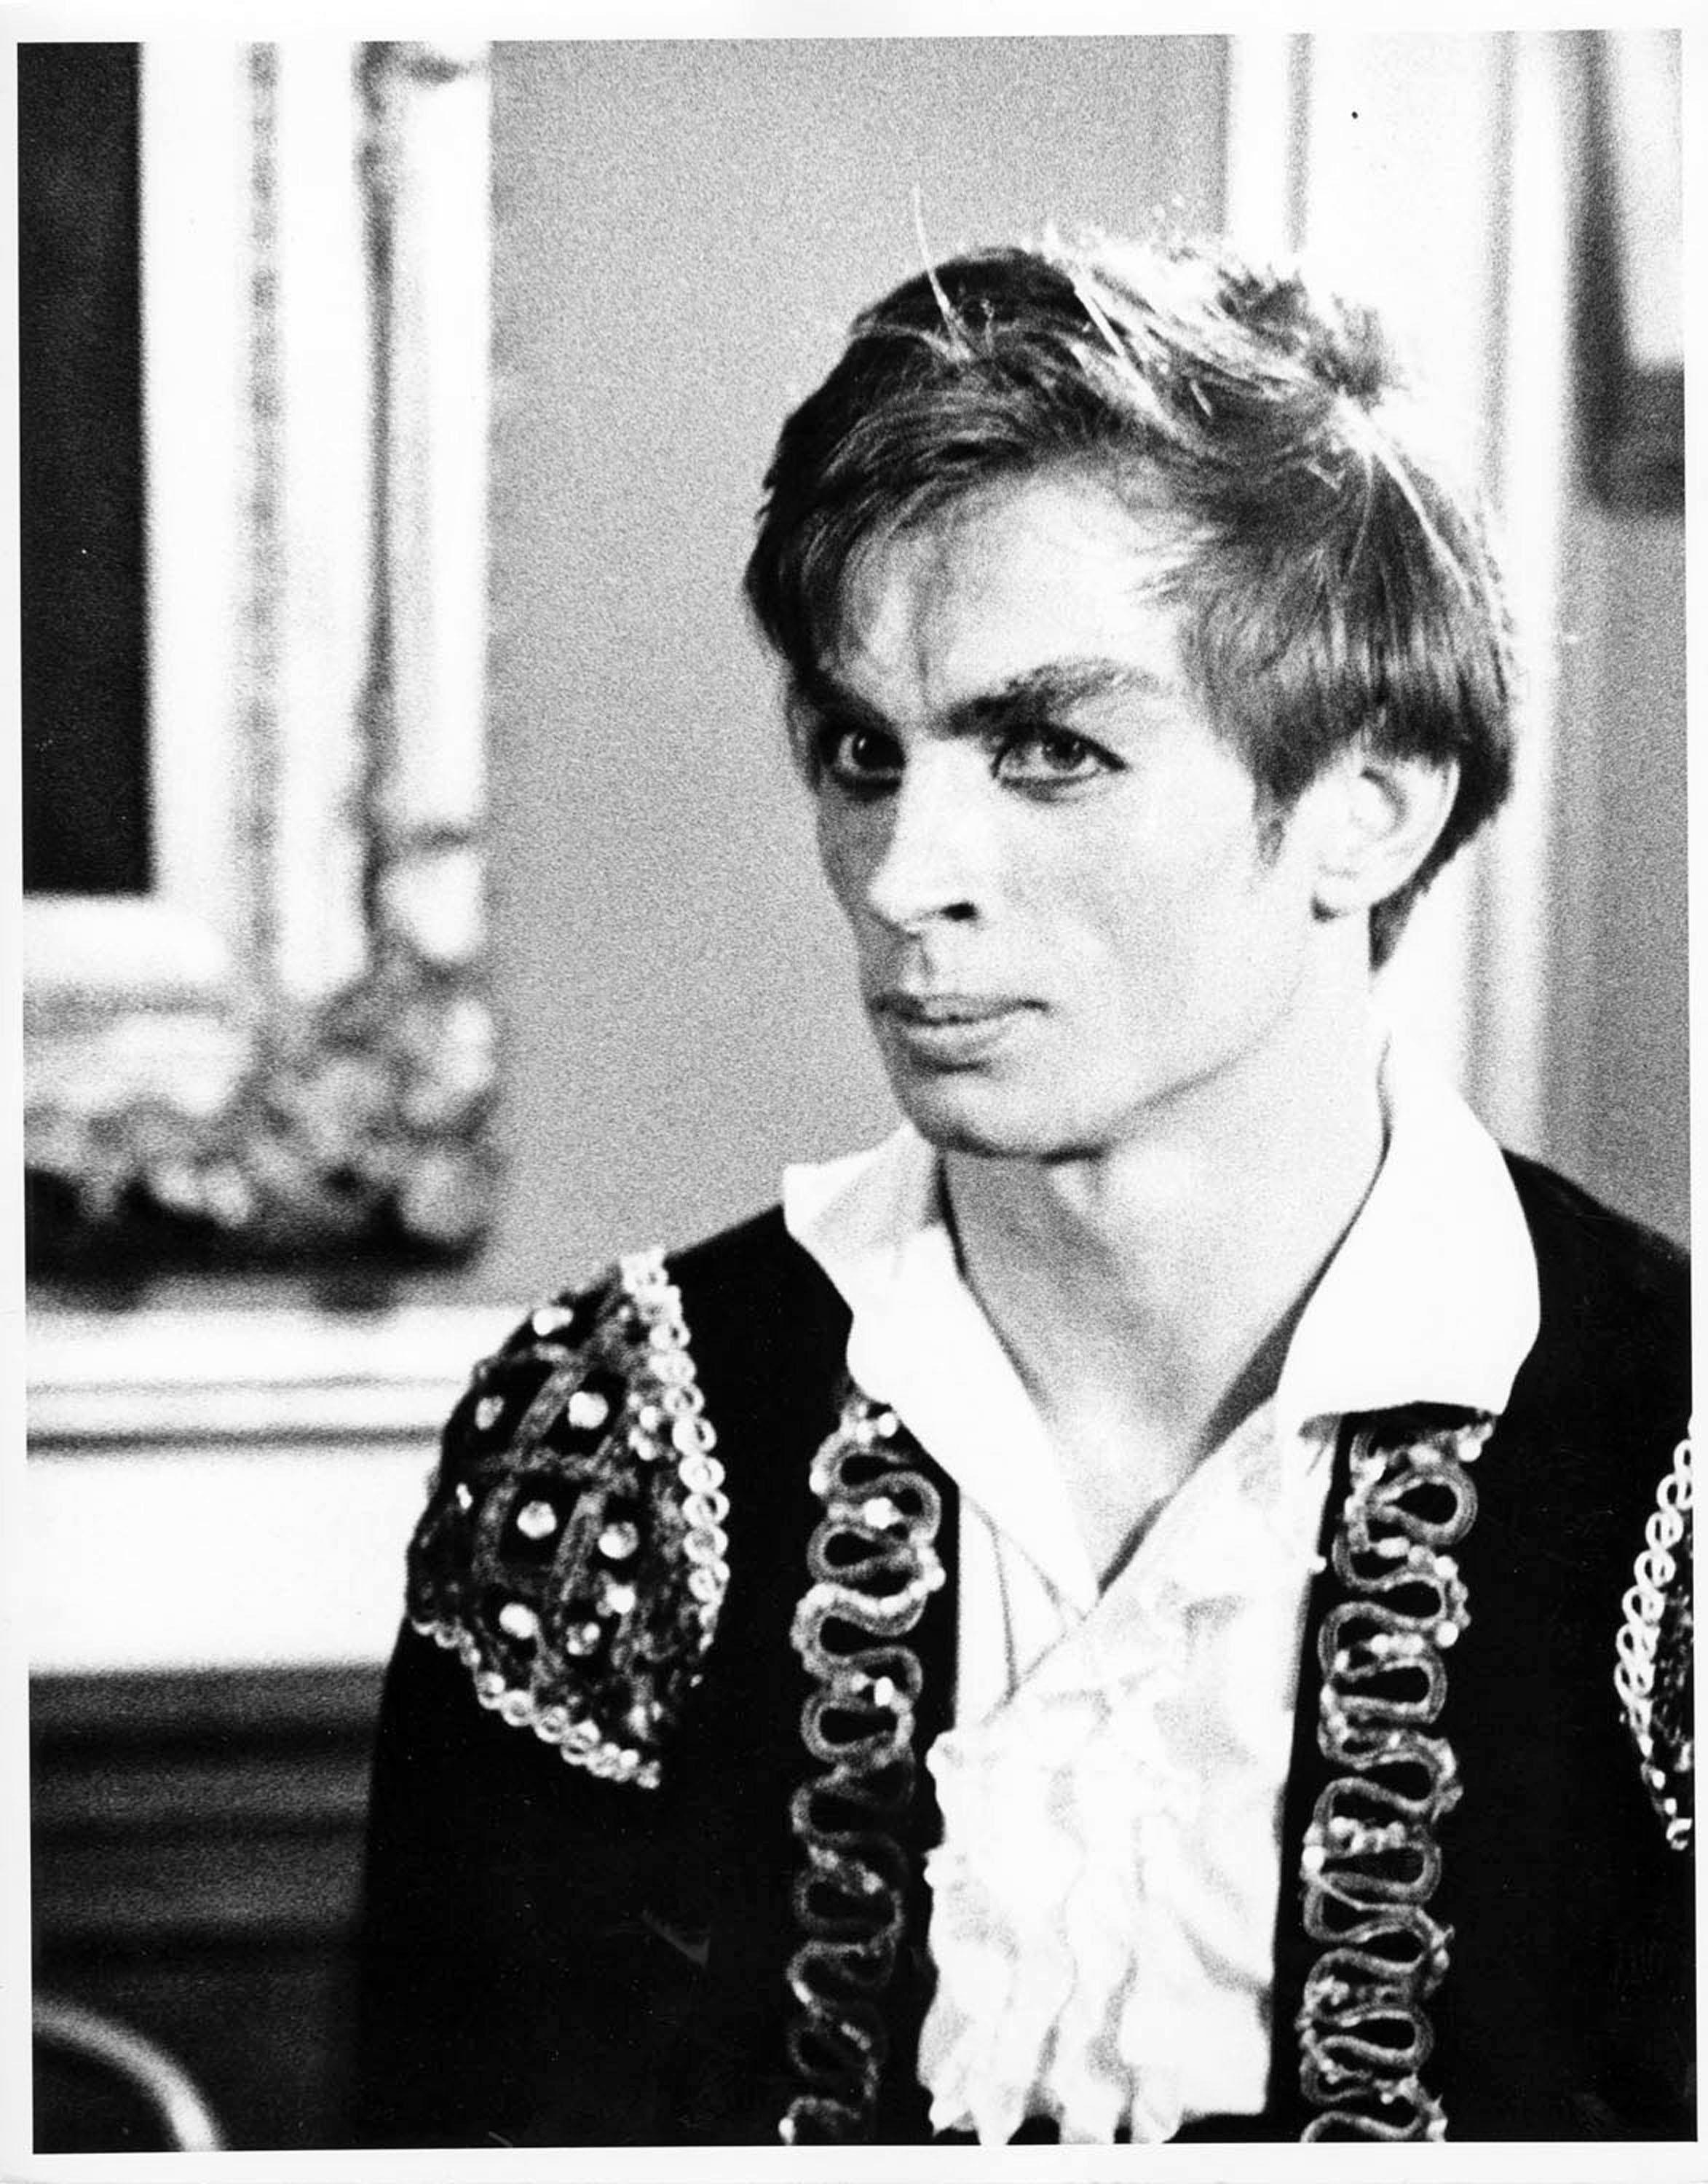 Rudolf Nureyev photographed just after his debut performance May 10, 1962.